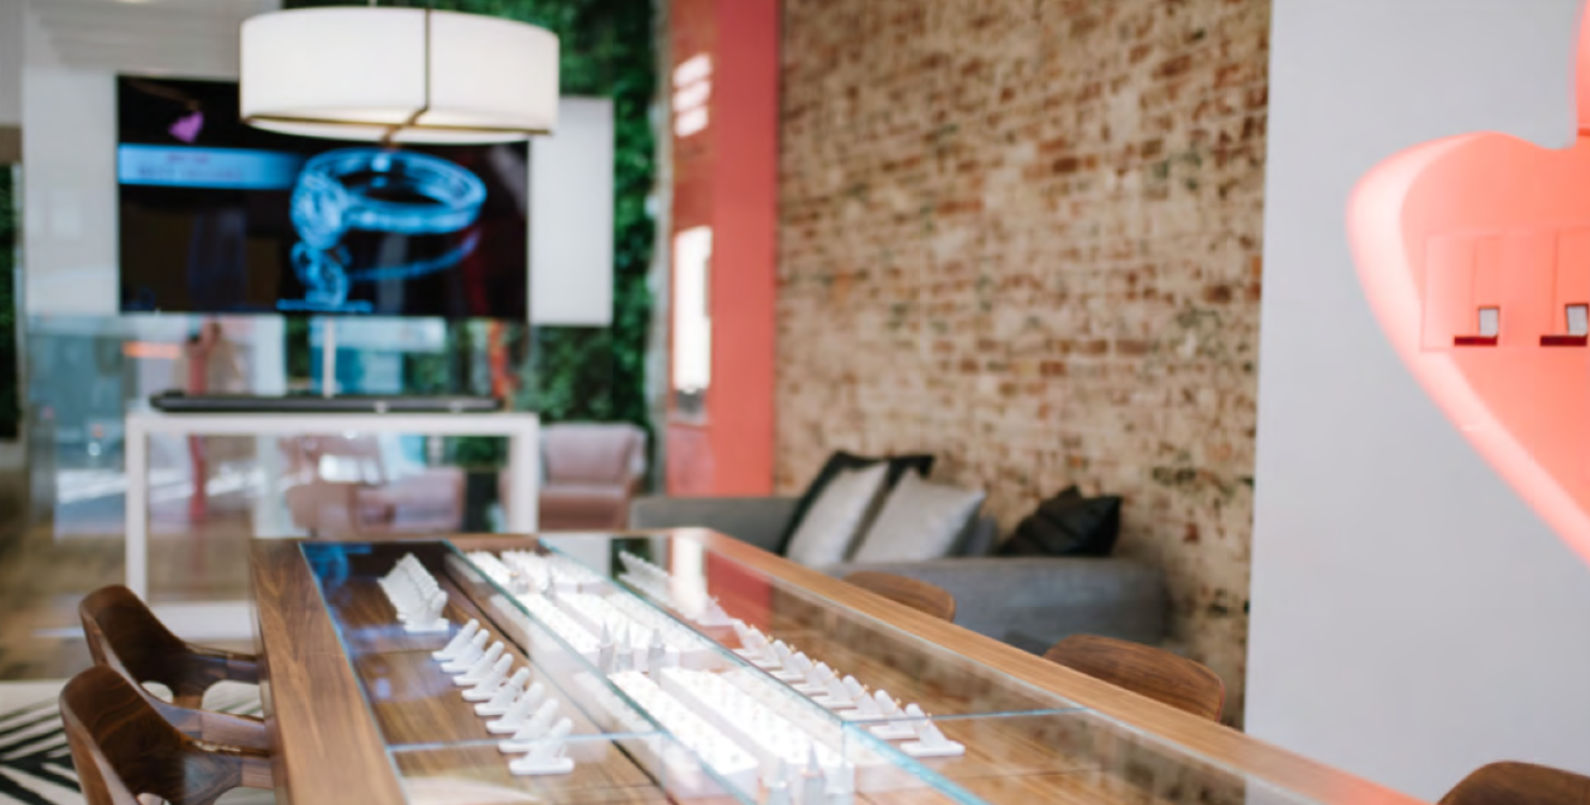 How Independent Jewelers Can Build a Strong Brand in a High-Tech World